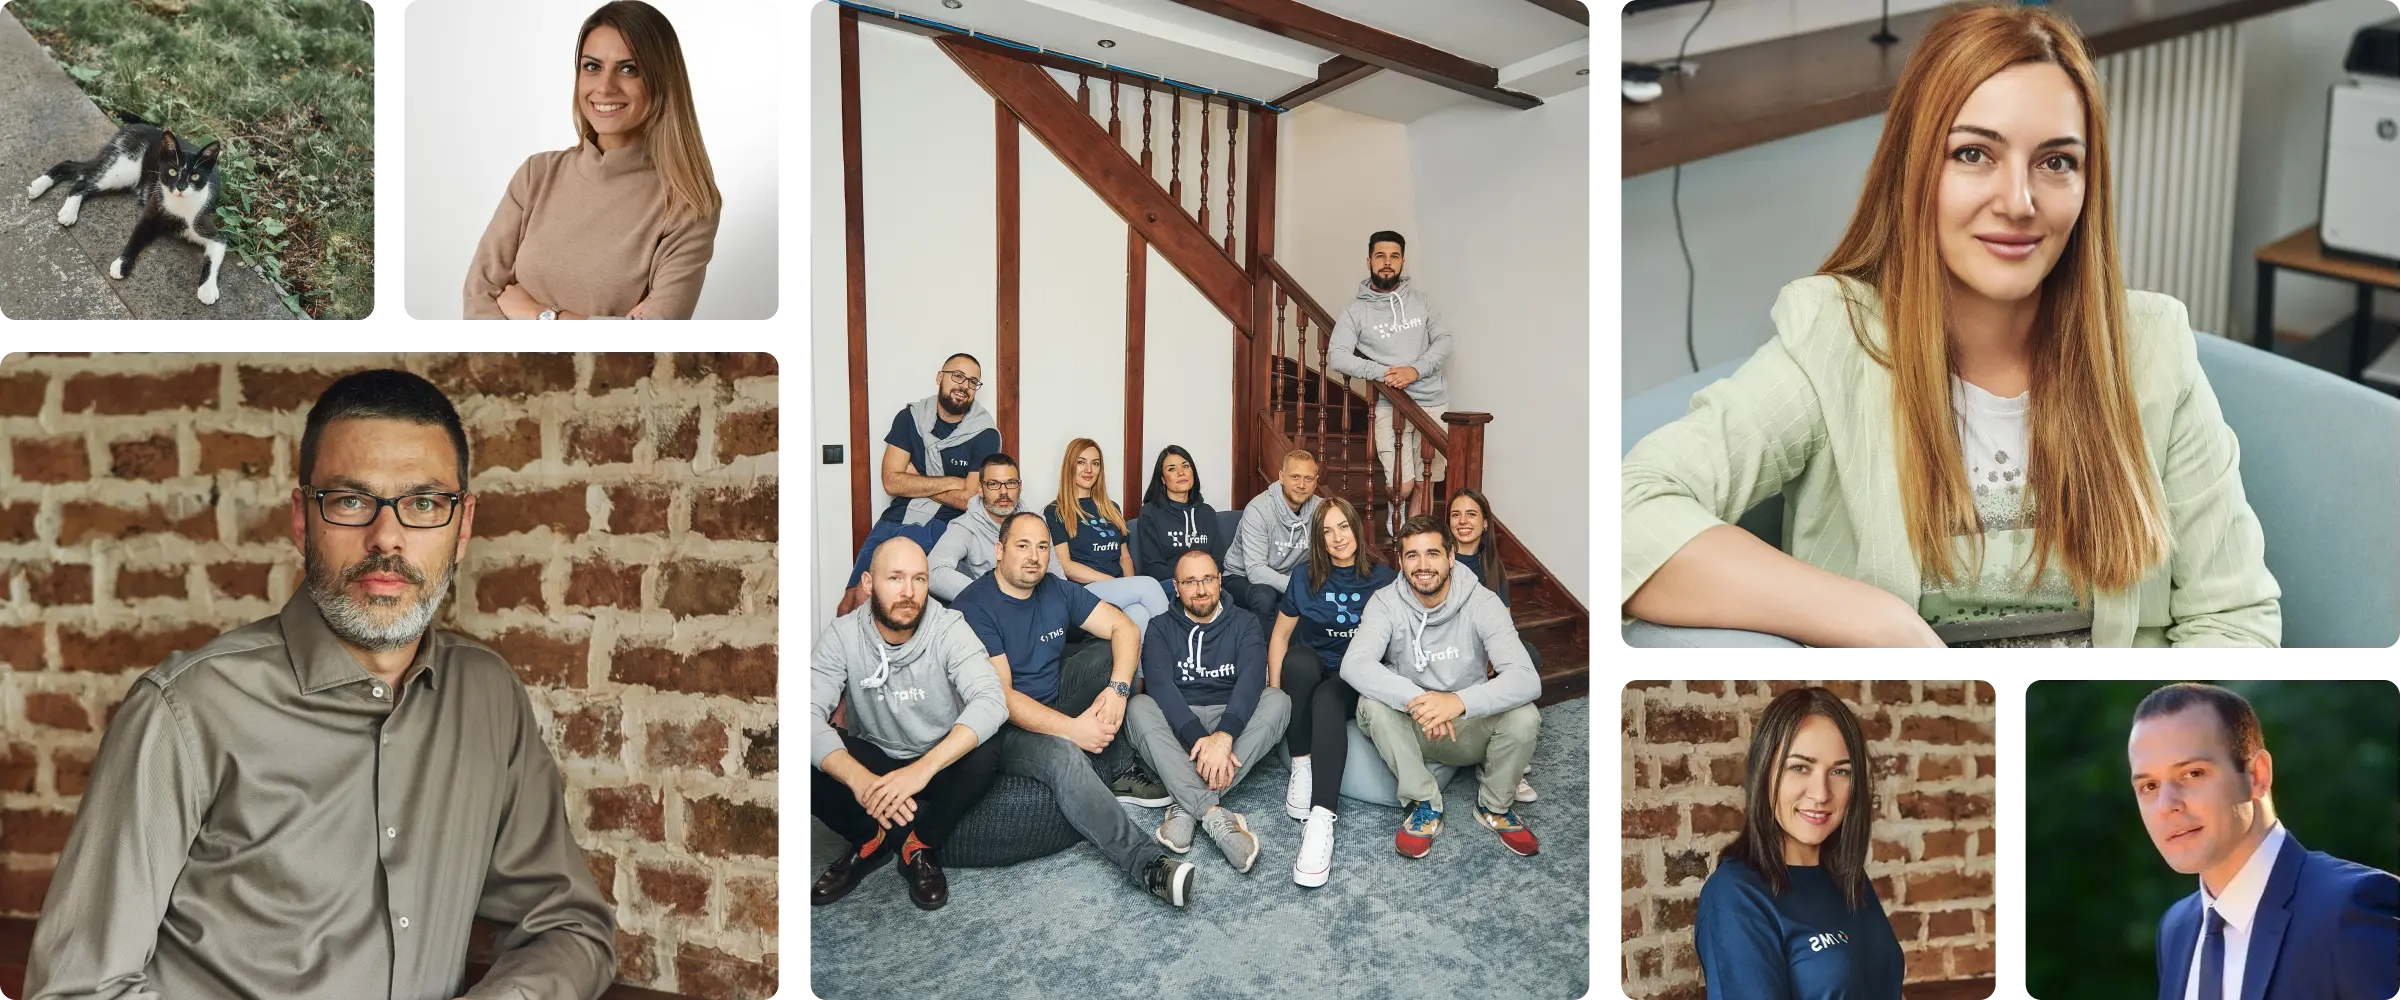 A collage of images of team members of Trafft’s development, marketing and support team